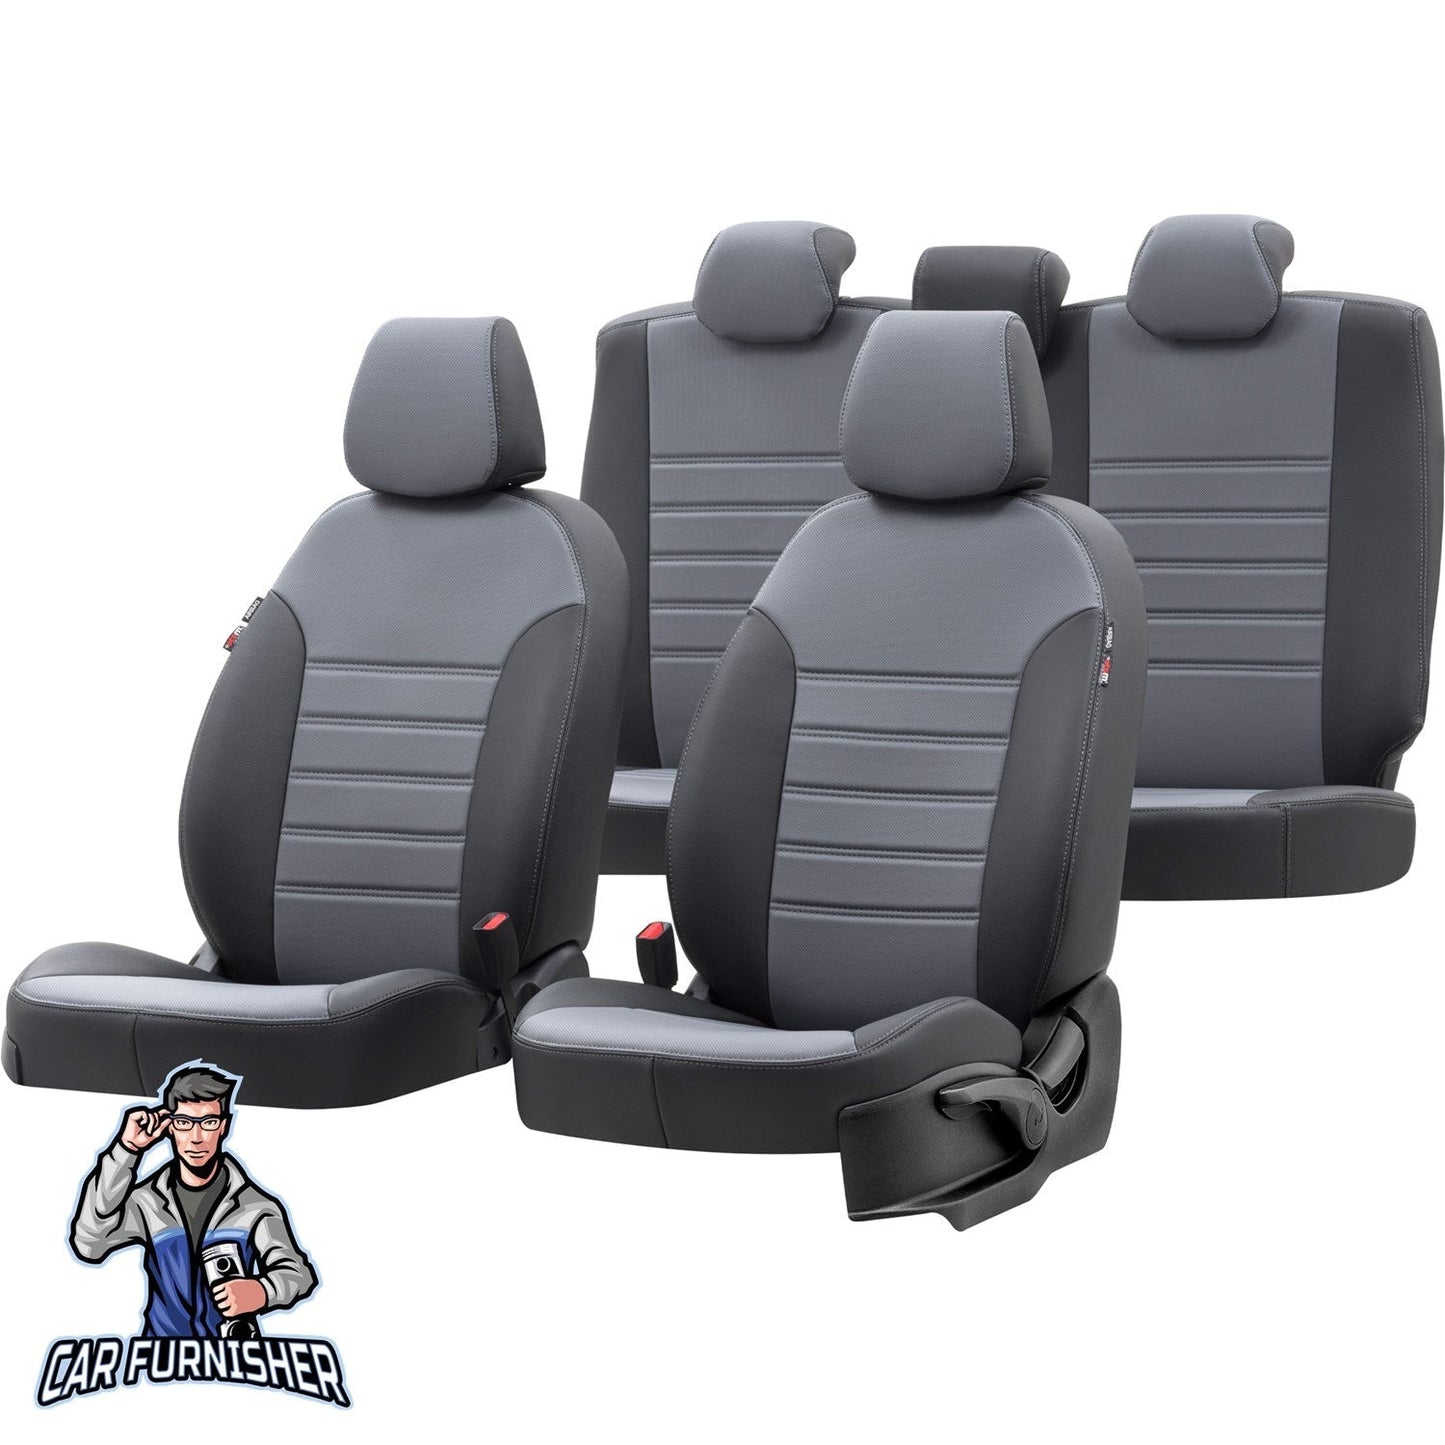 Opel Frontera Seat Cover Istanbul Leather Design Smoked Black Leather